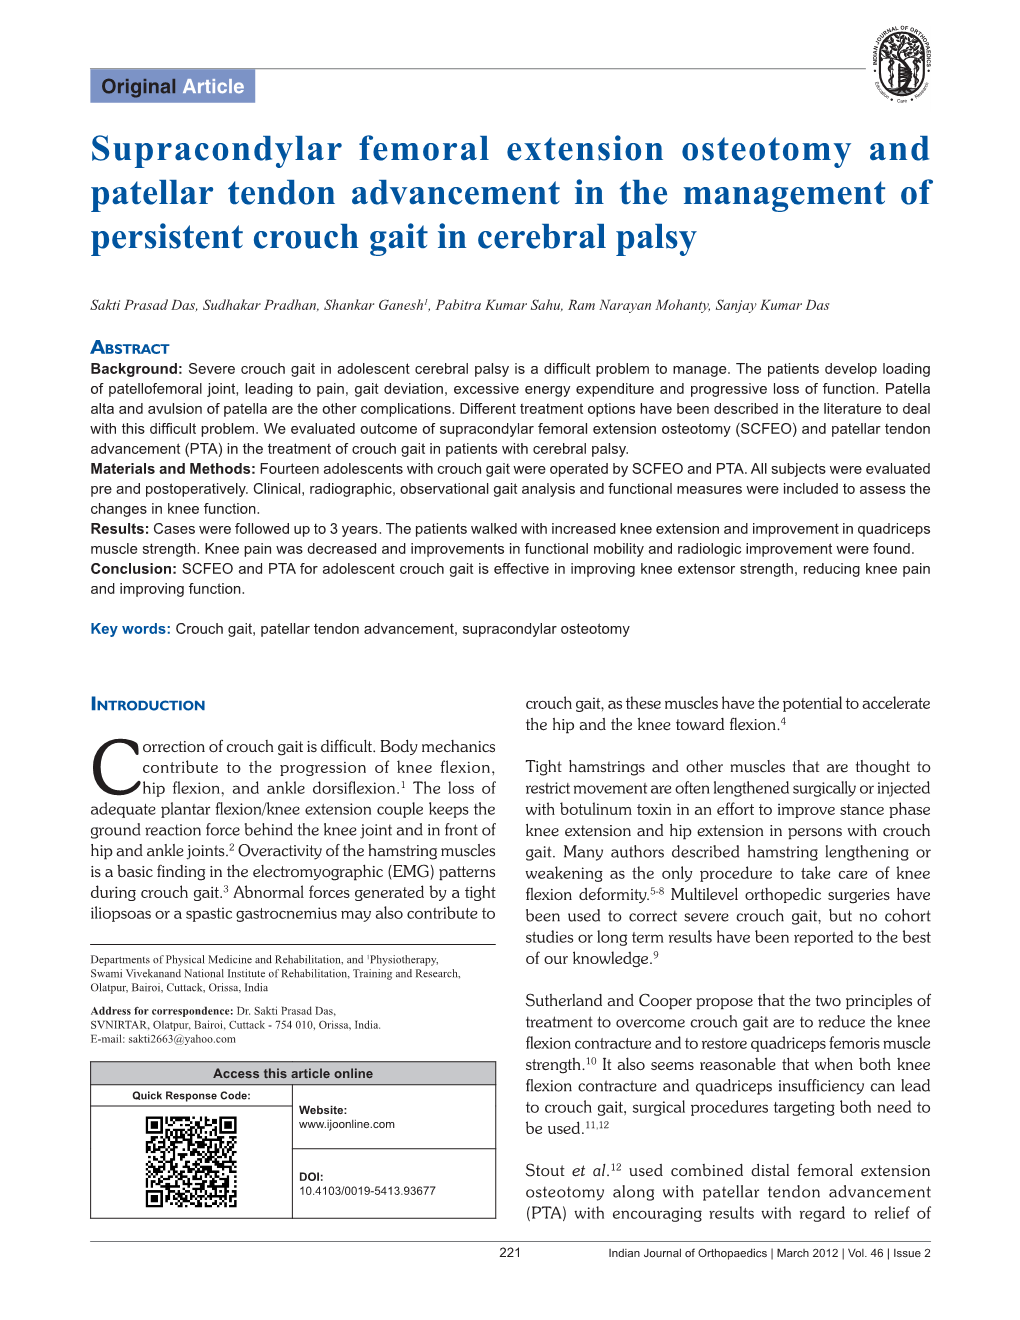 Supracondylar Femoral Extension Osteotomy and Patellar Tendon Advancement in the Management of Persistent Crouch Gait in Cerebral Palsy